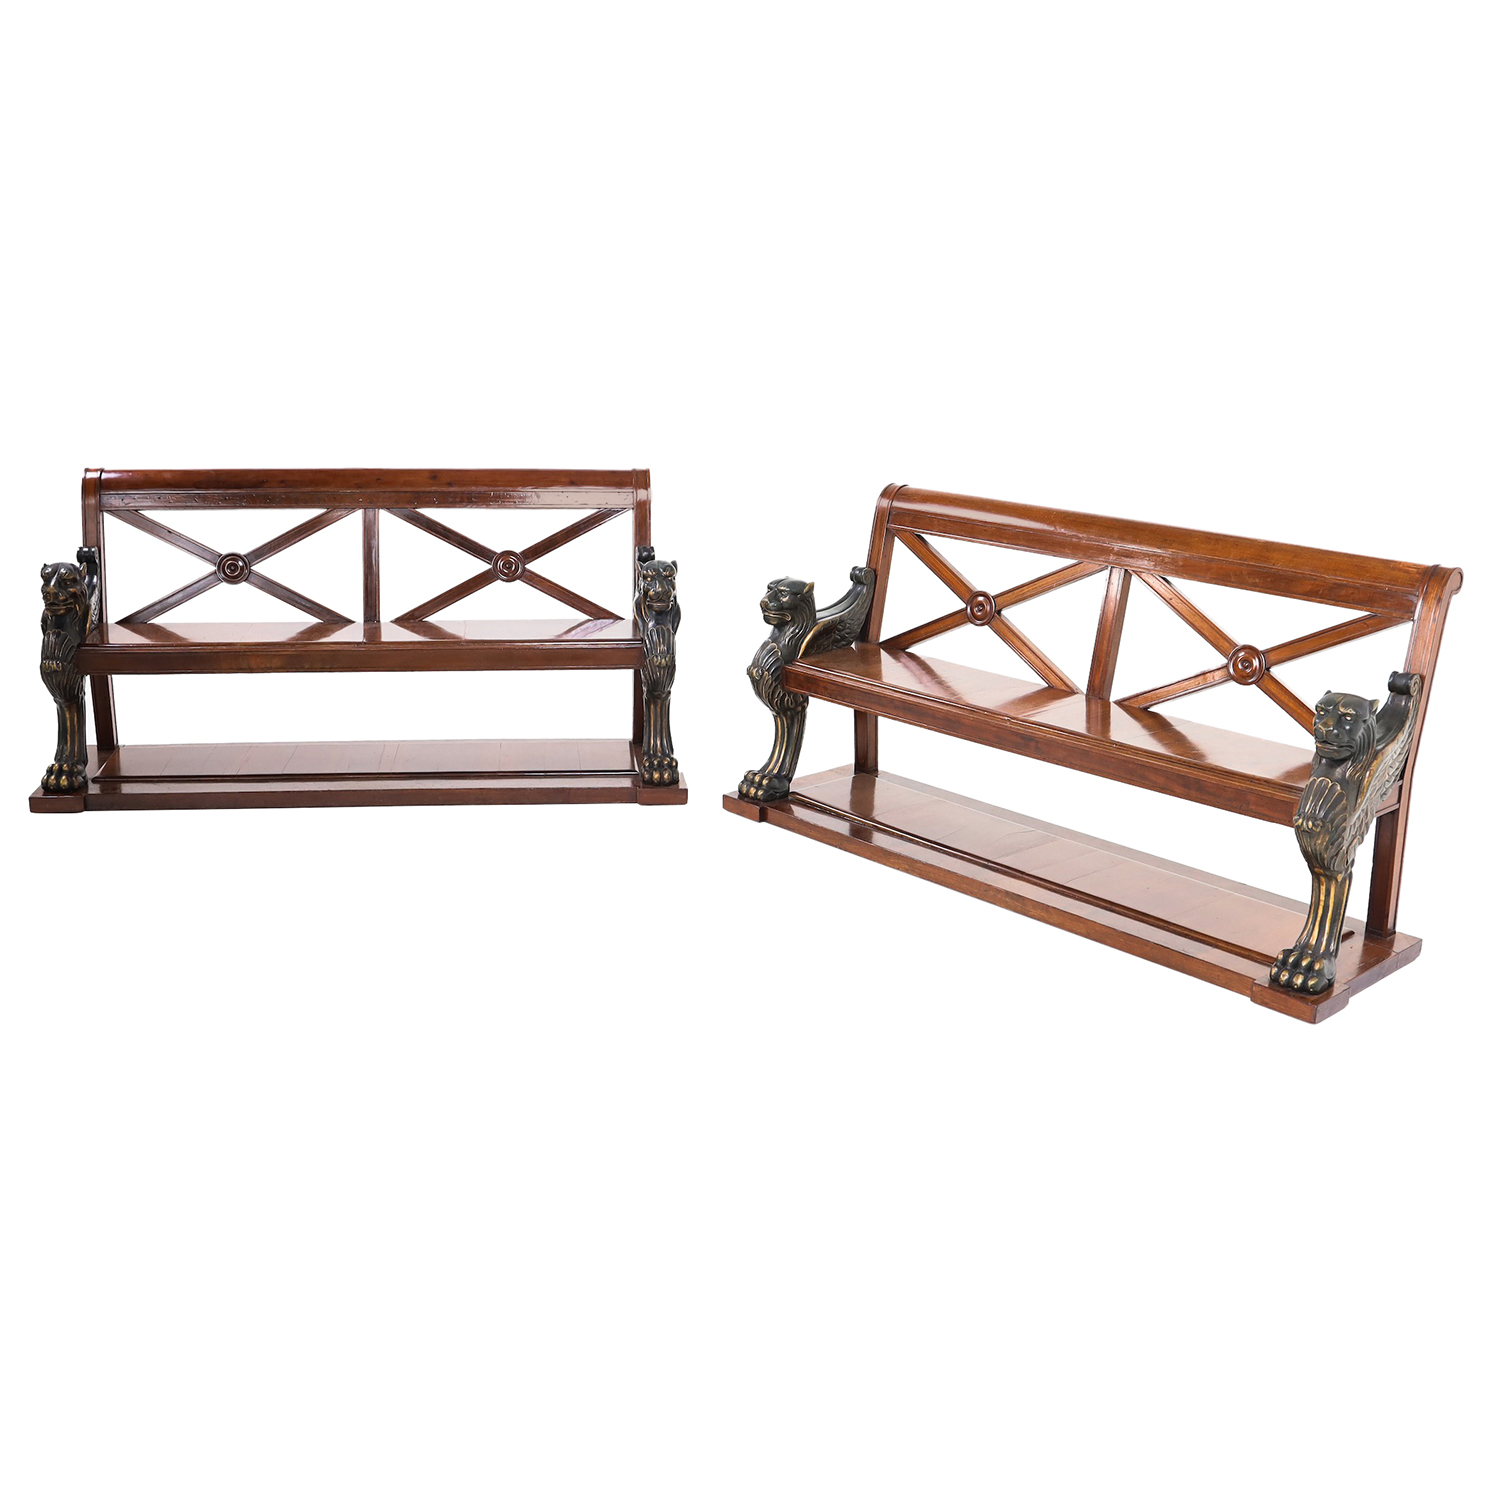 19th Century French Pair of Mahogany Benches Attributed to Jacob Desmalter